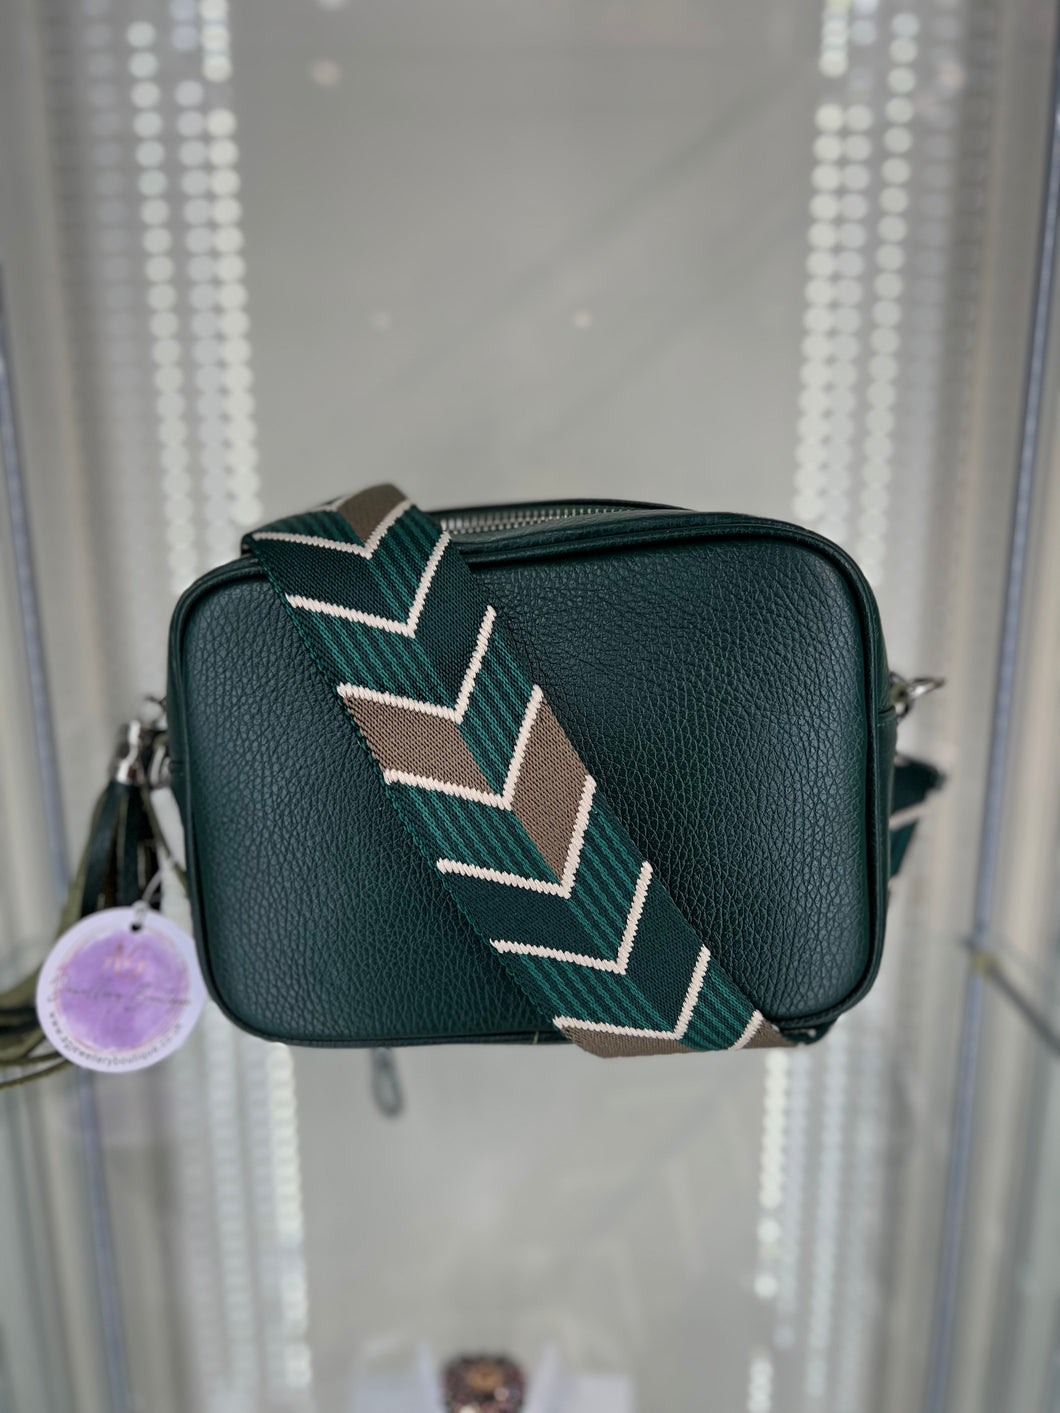 Real Leather Forest Green Bag with Green chevron strap